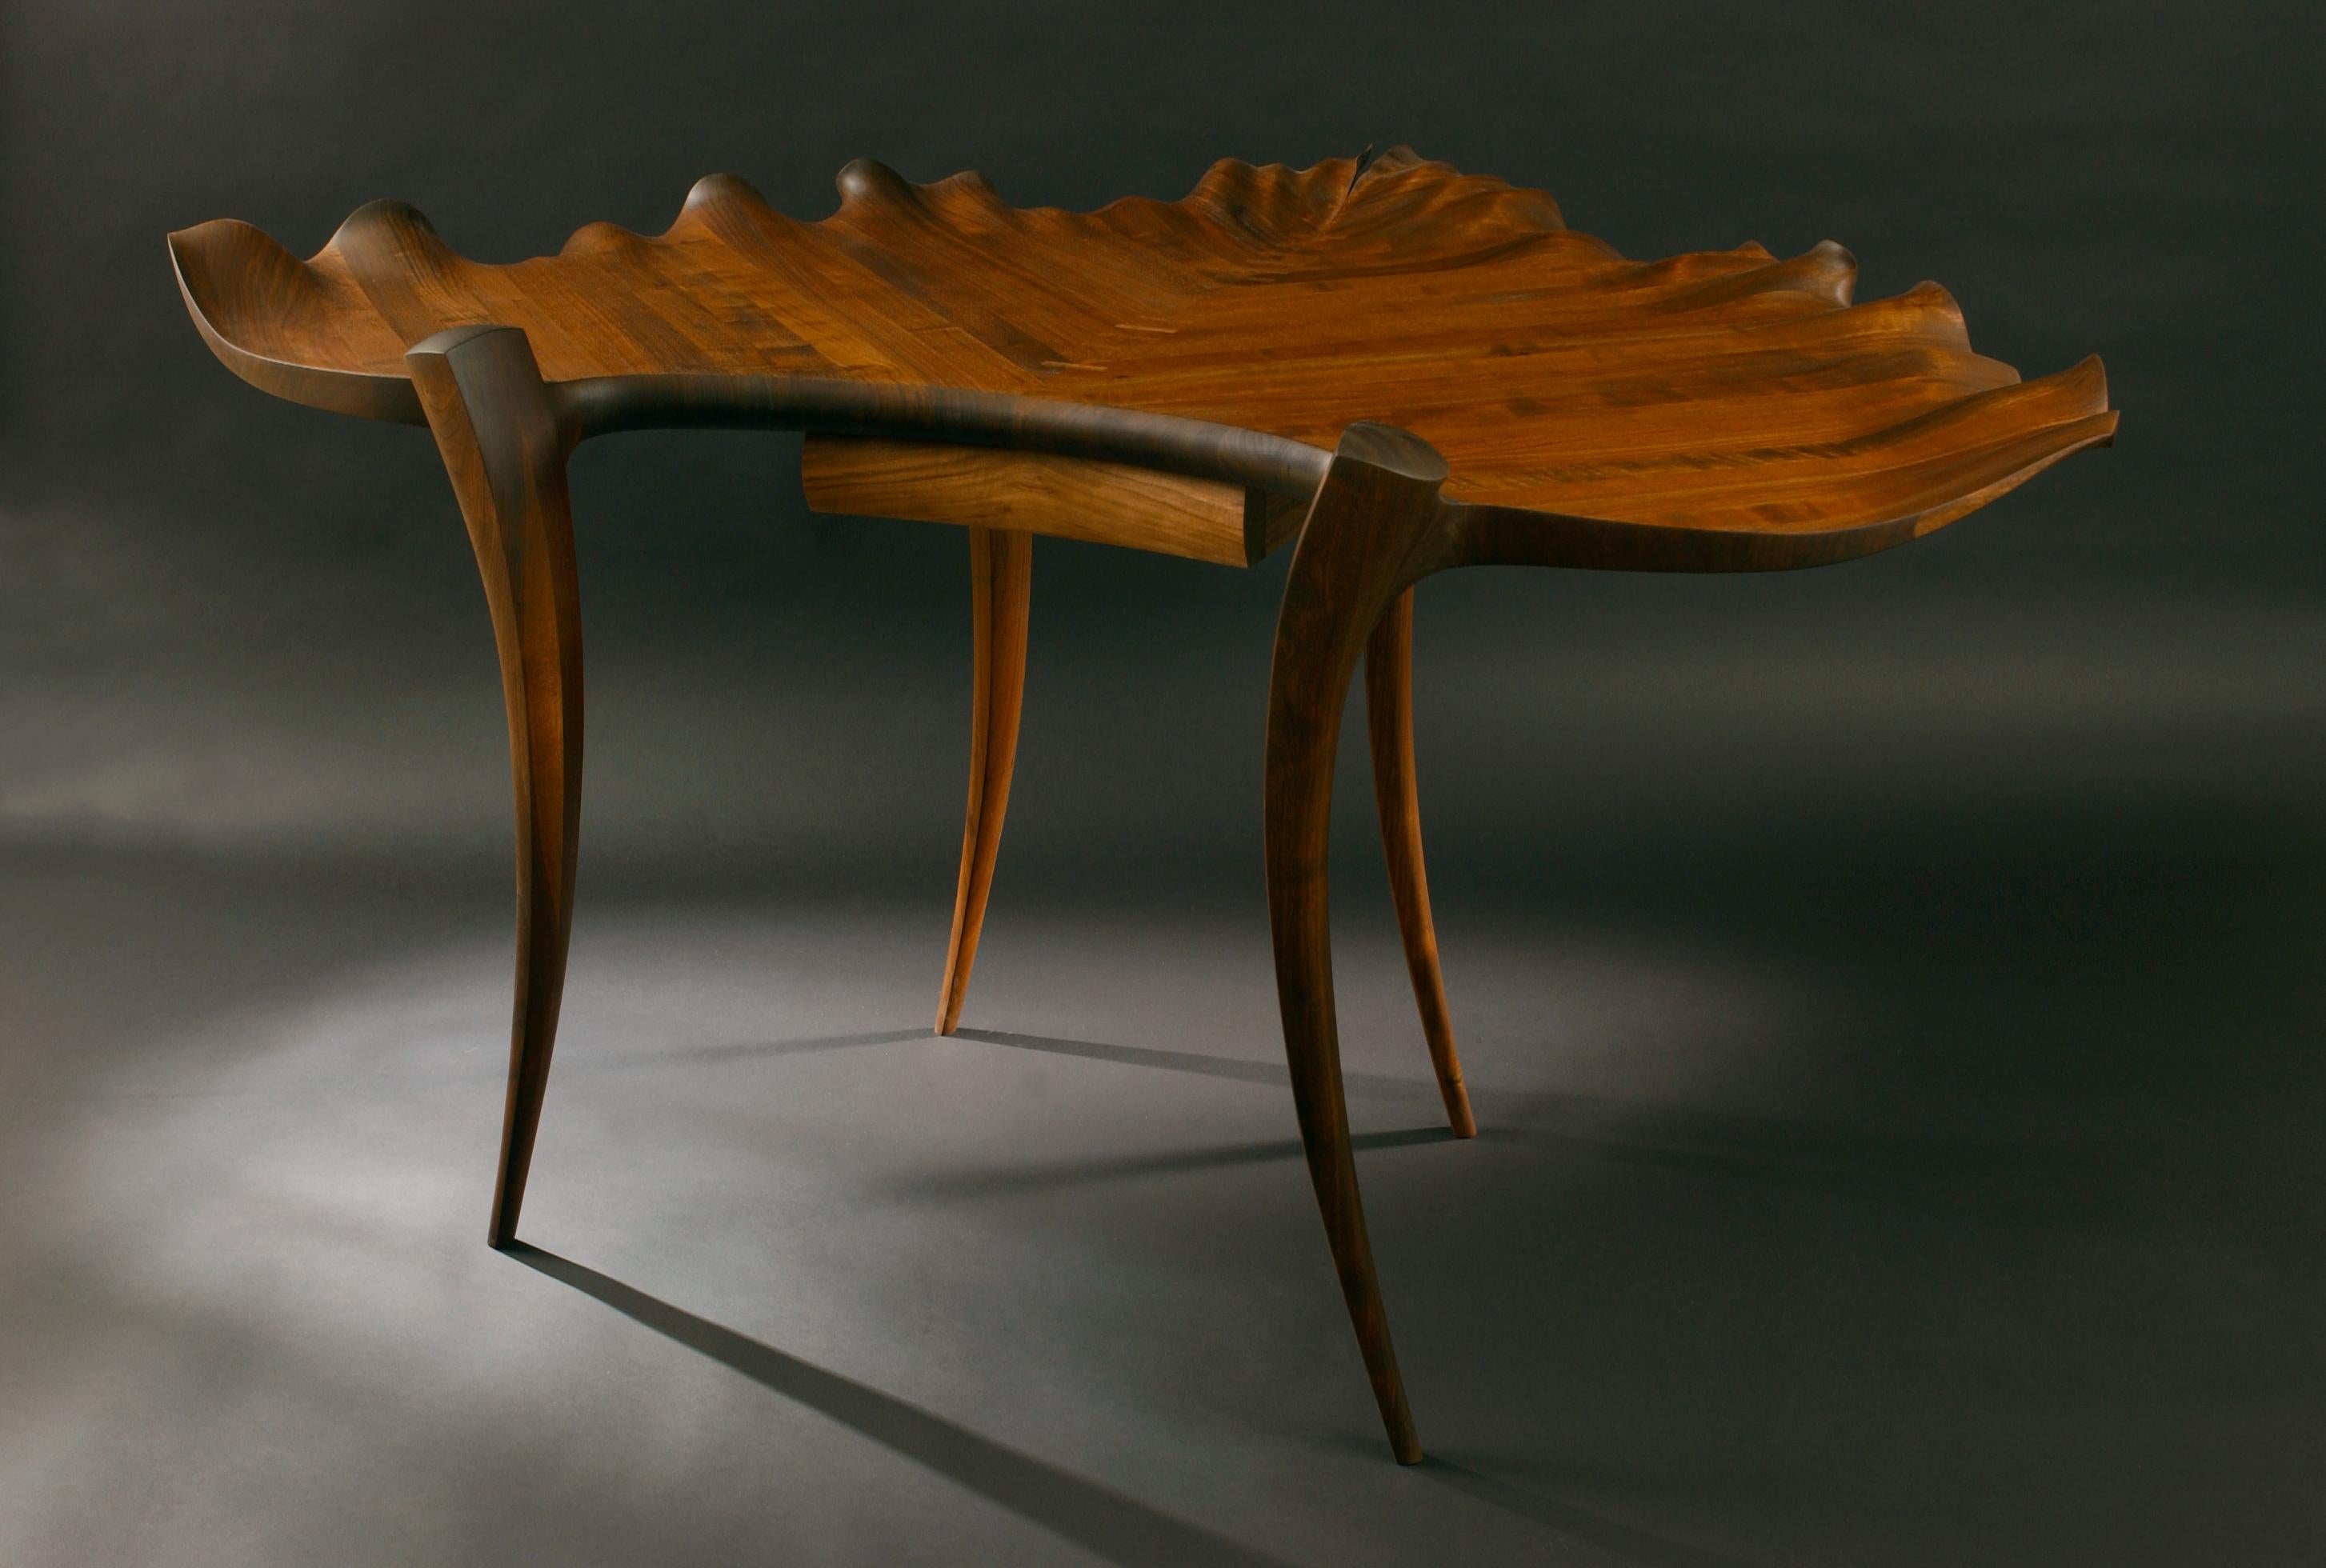 Beethoven is green with envy

The Handel Leaf Desk is a work from the artist's Leaf Table Series, from which several leaf tables are in various museum permanent collections. 

Two seven-inch thick laminated walnut sections, each weighing nearly